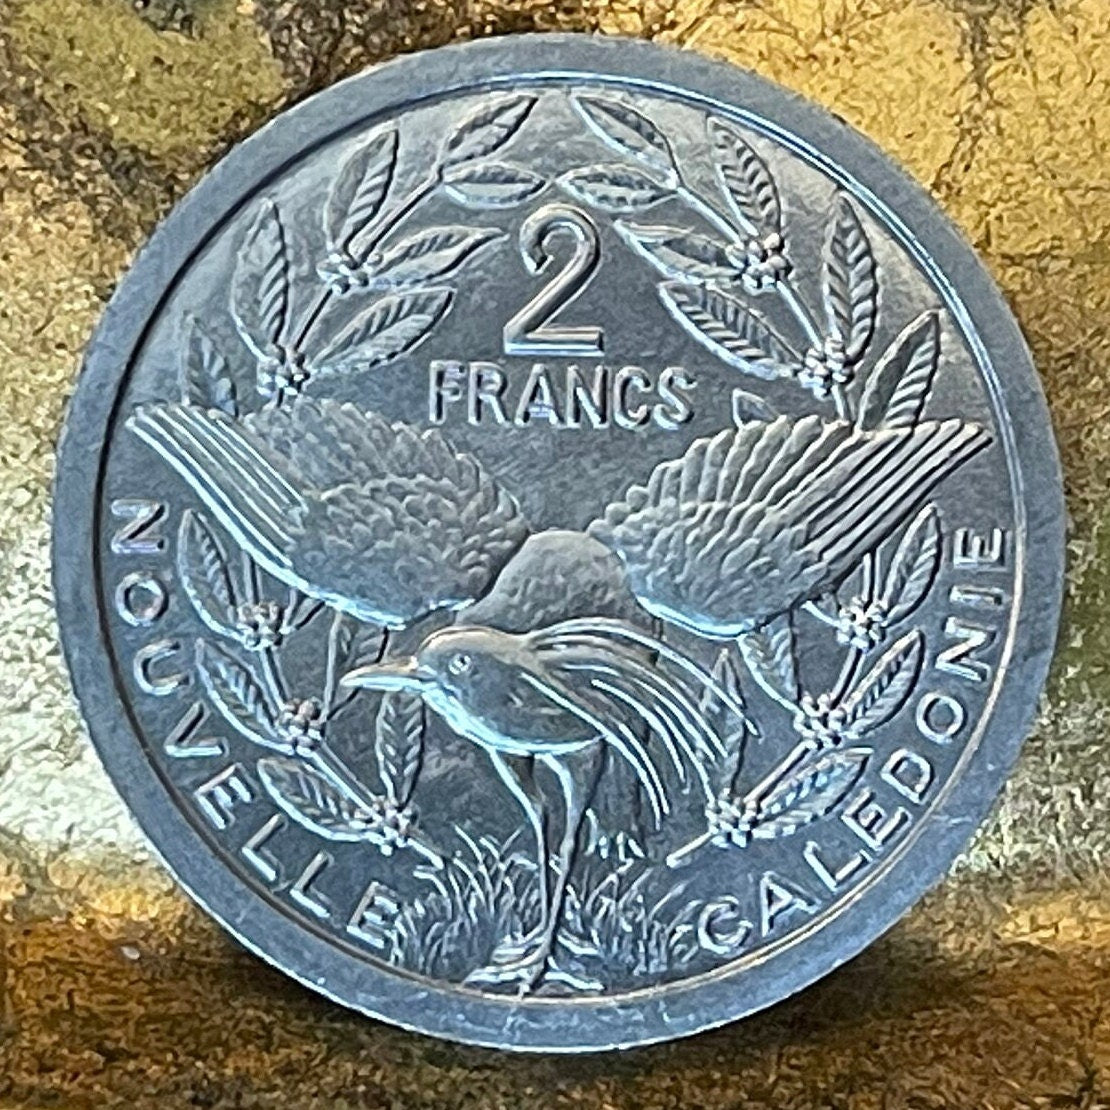 Kagu Bird & Liberty on Throne 2 Francs New Caledonia Authentic Coin Money for Jewelry and Craft Making (South Pacific Islands)